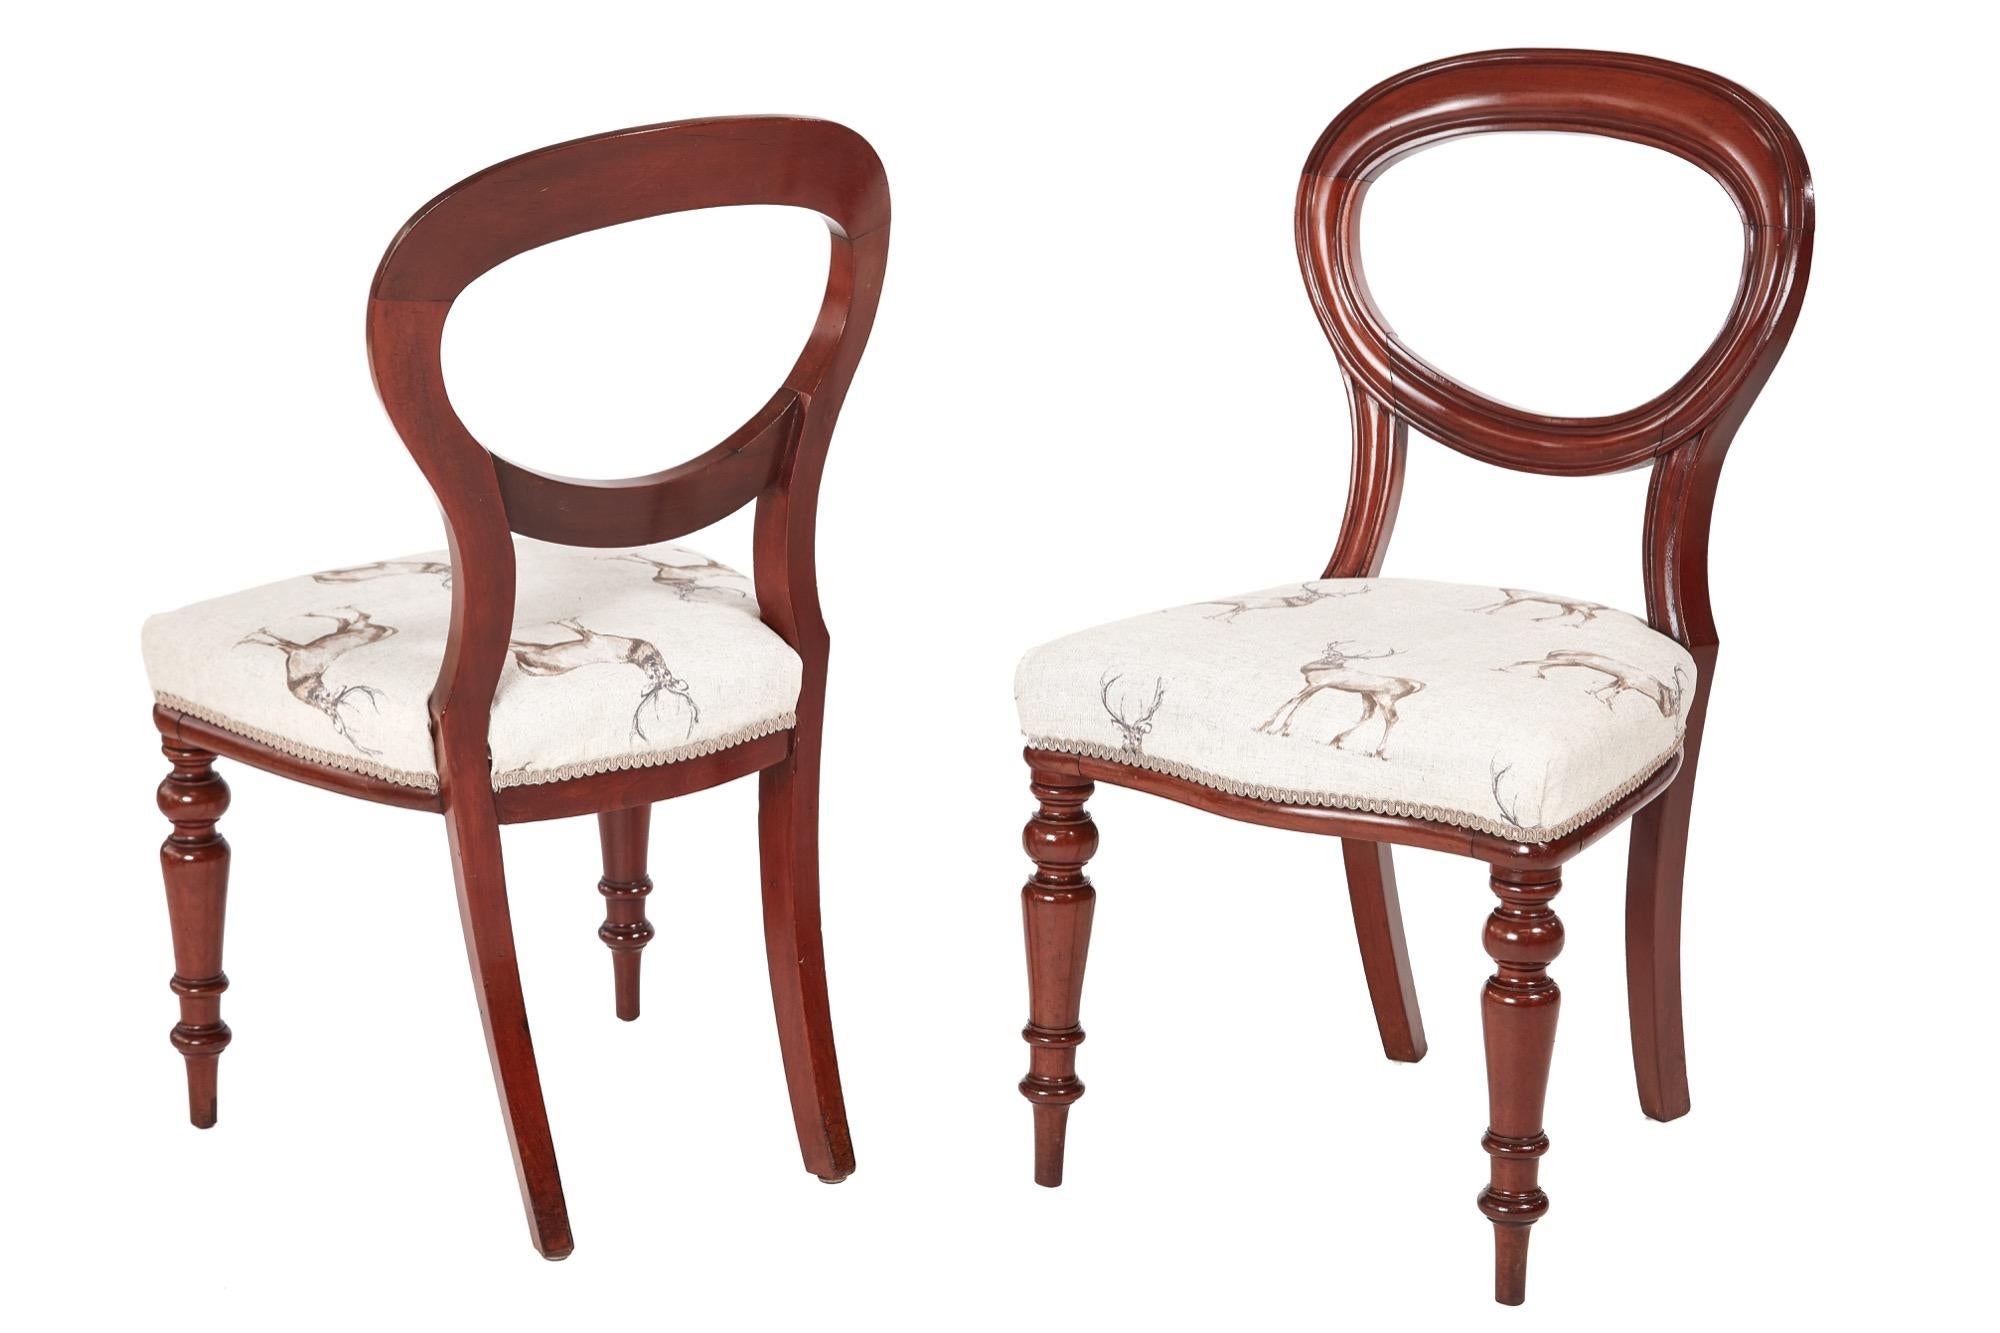 Quality set of six Victorian mahogany balloon back dining chairs, with a lovely reeded balloon back, serpentine shaped front rail, standing on lovely turned legs to the front outswept back legs.
Newly re-upholstered seats
Lovely color and